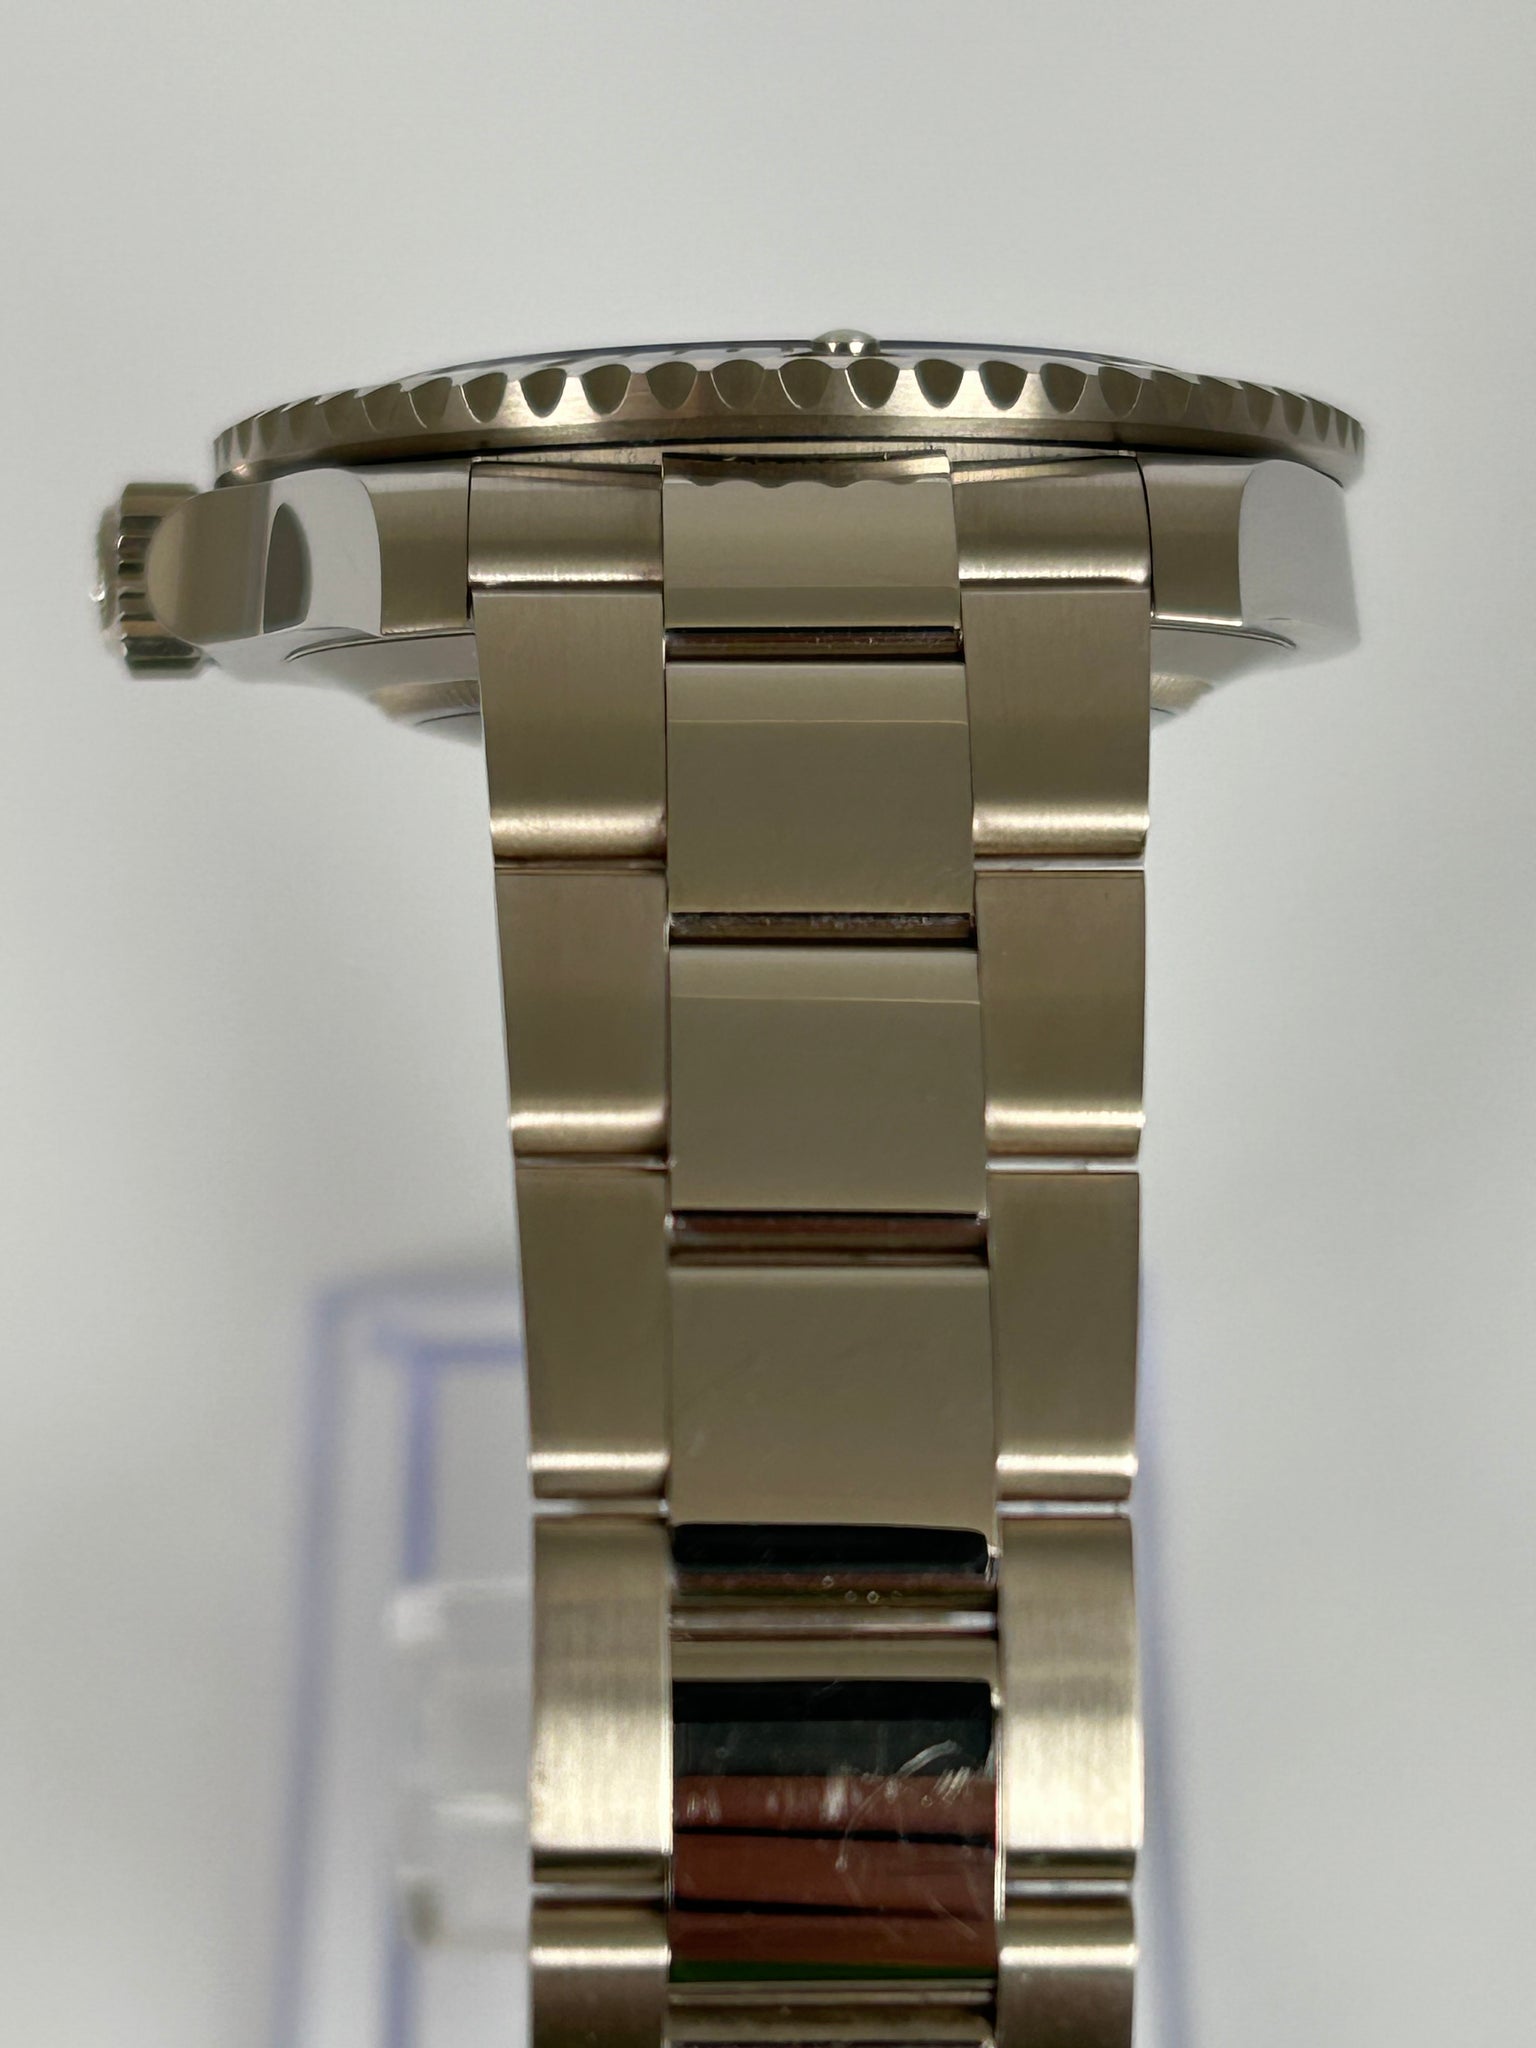 ROLEX SUBMARINER COOKIE MONSTER WHITE GOLD 126619LB